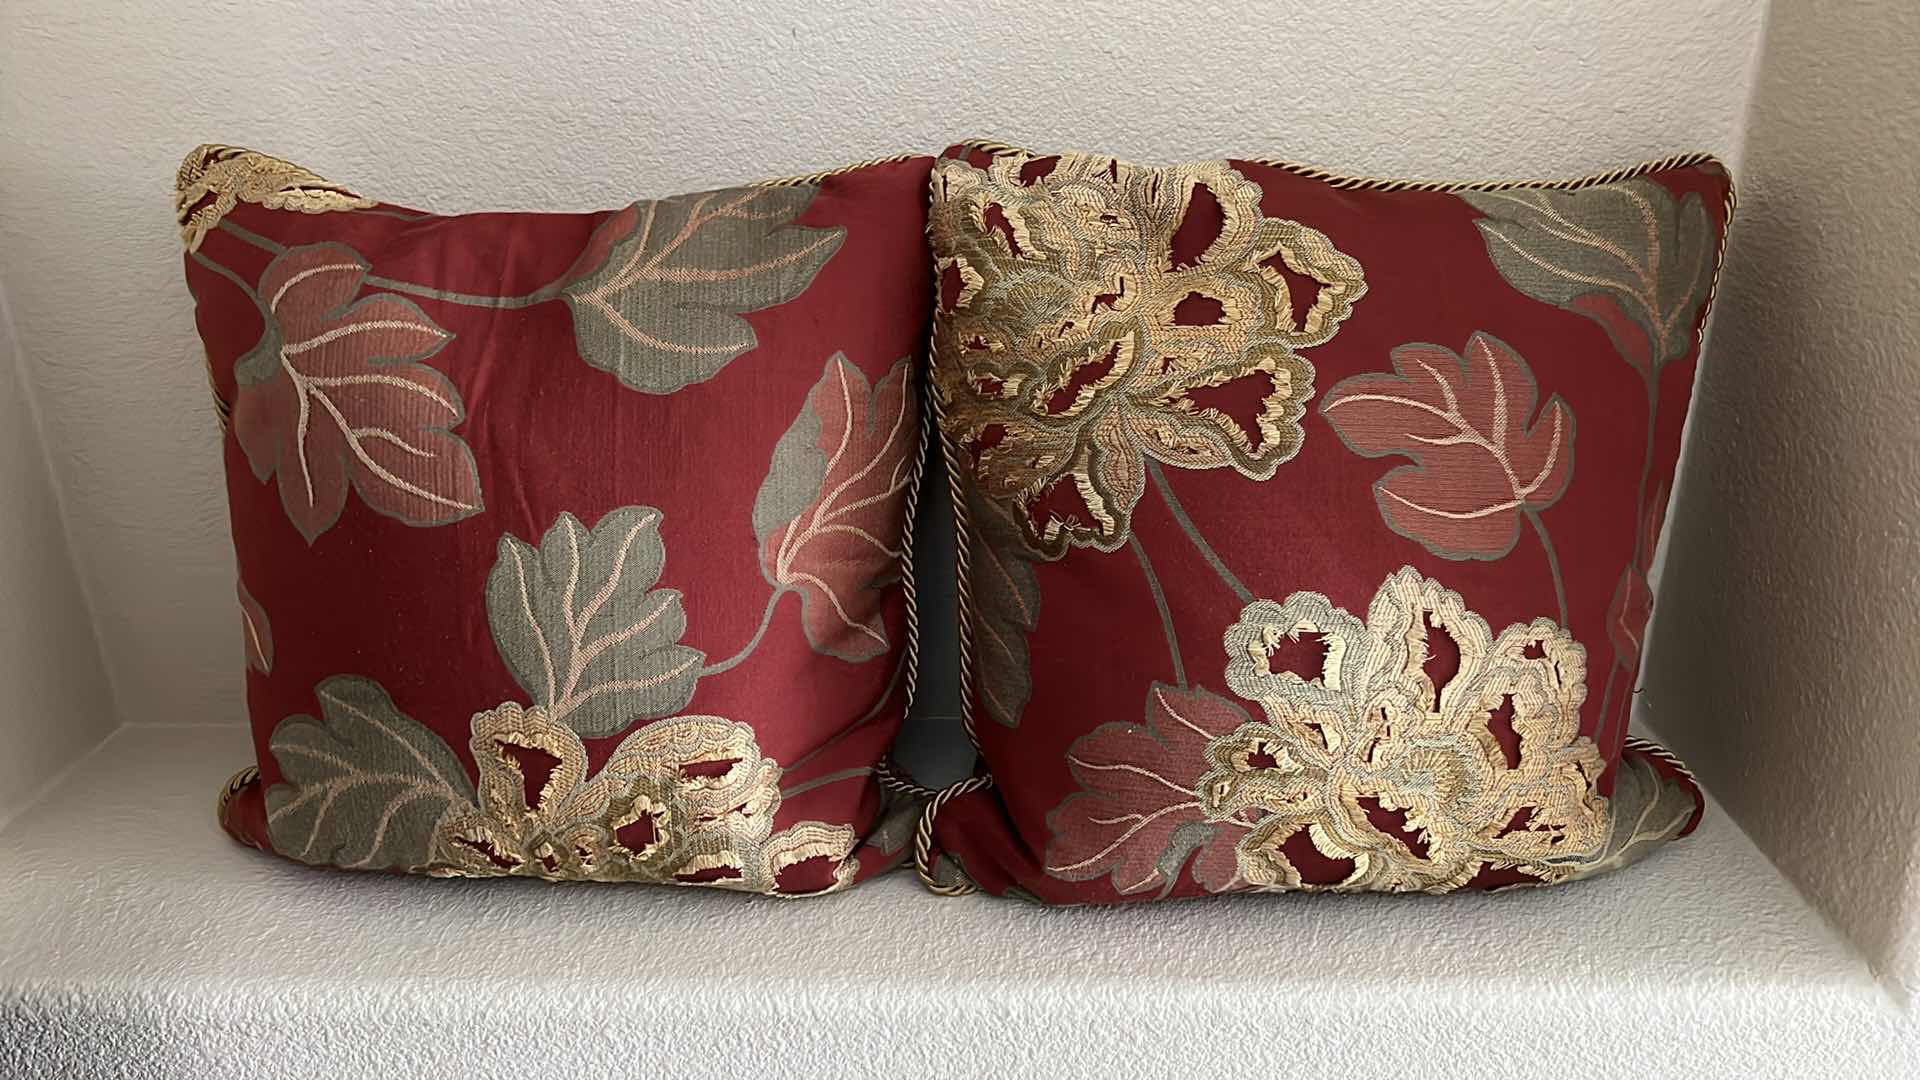 Photo 1 of 2-DECORATIVE FLORAL ACCENT PILLOWS 20” x 20”